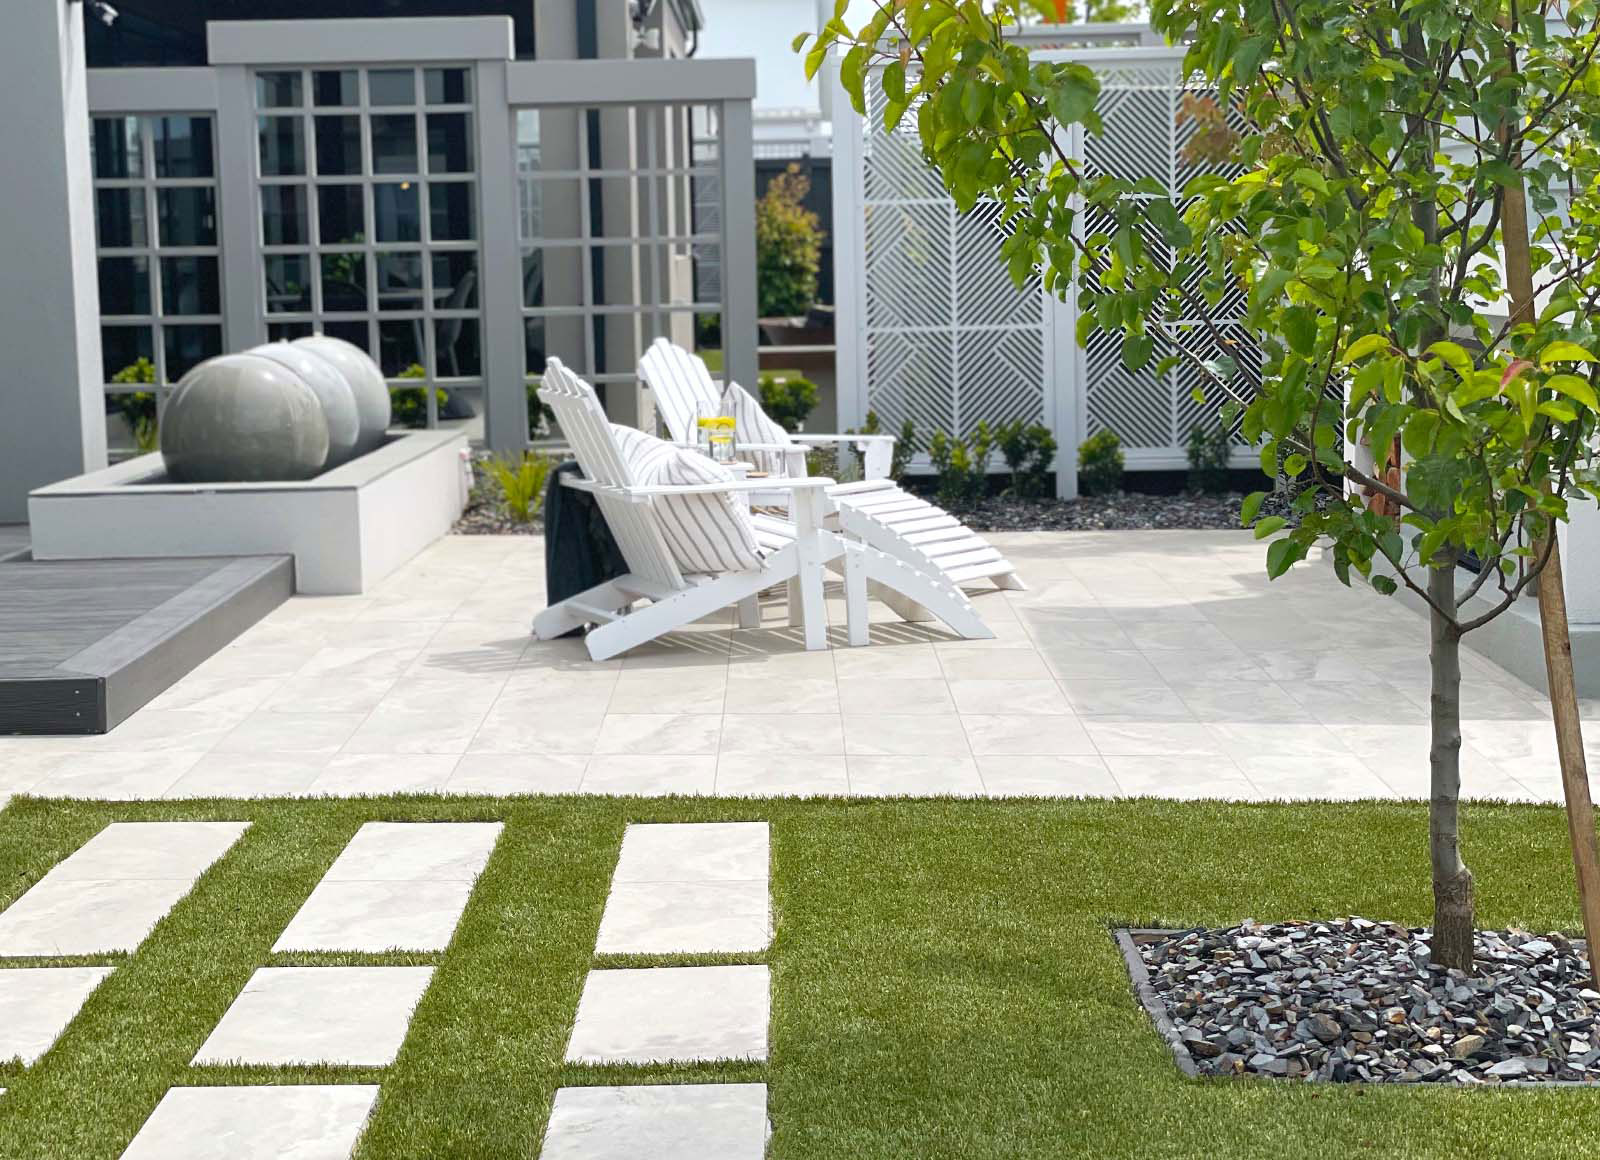 A Step-by-Step Guide to Landscaping Your New Home